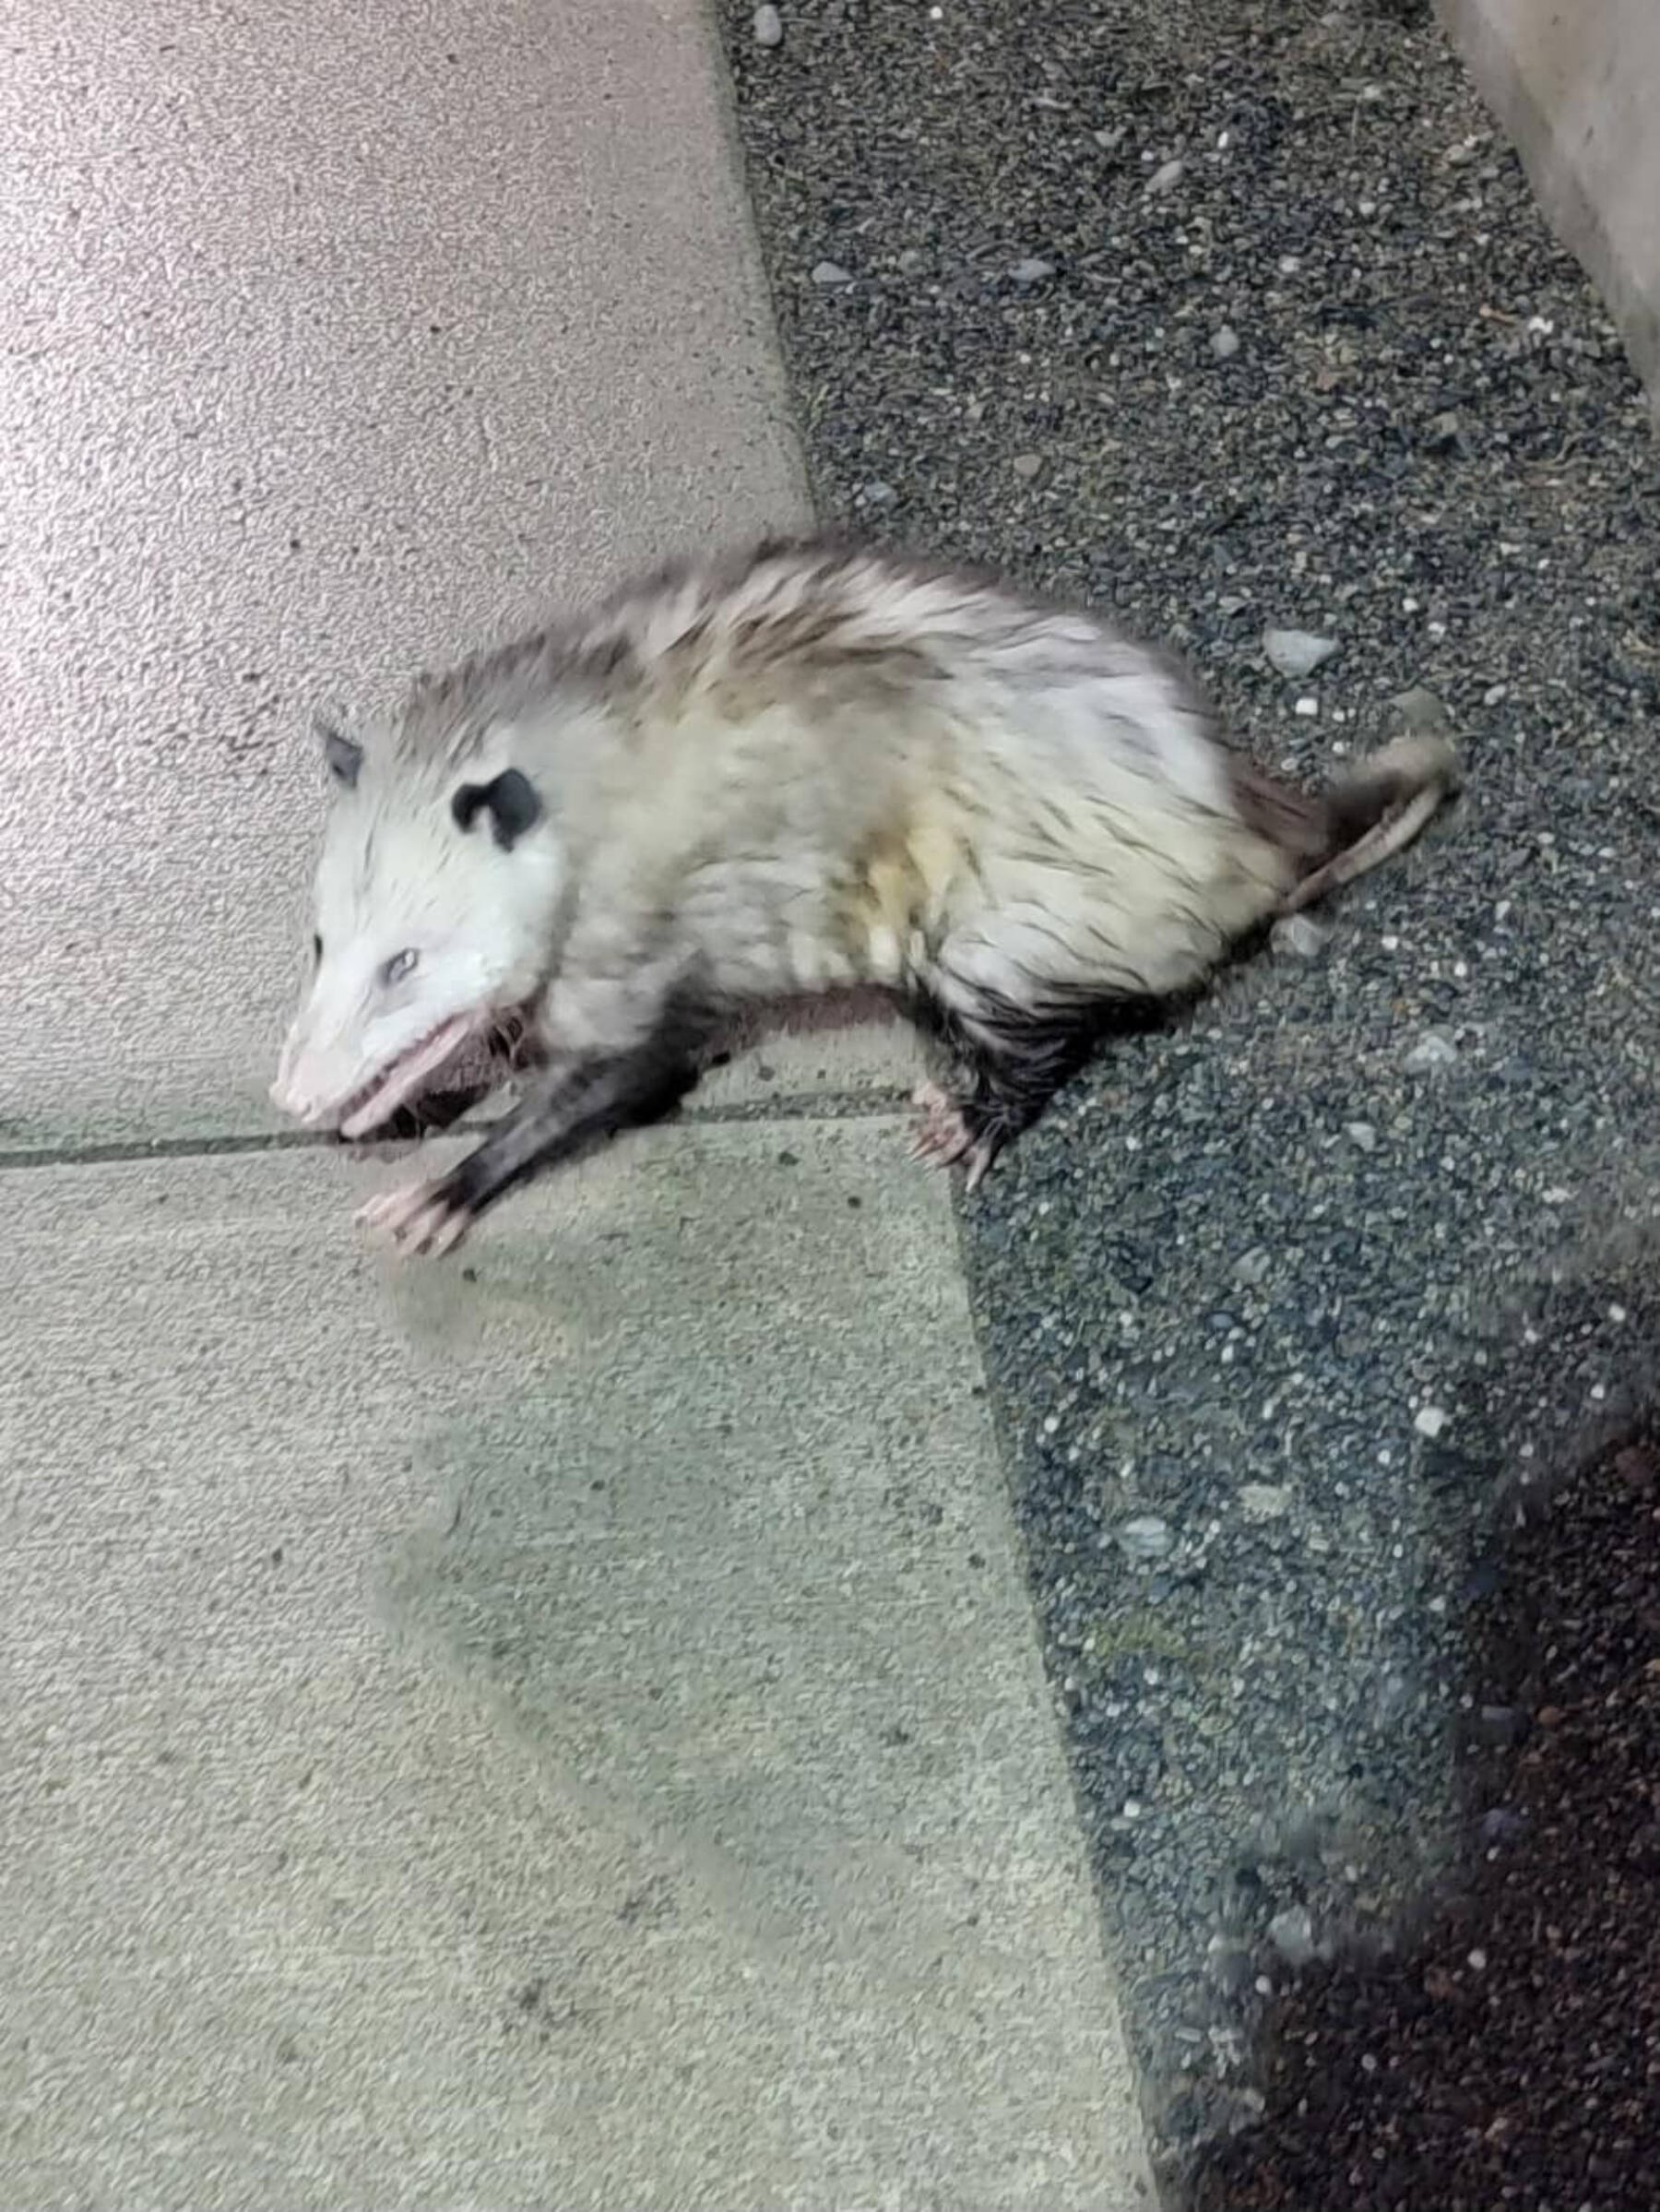 “Grubby” the Virginia opossum is captured by Homer Police officer Taylor Crowder on Wednesday, May 24, 2023 in Homer, Alaska. Photo by Homer Police Department